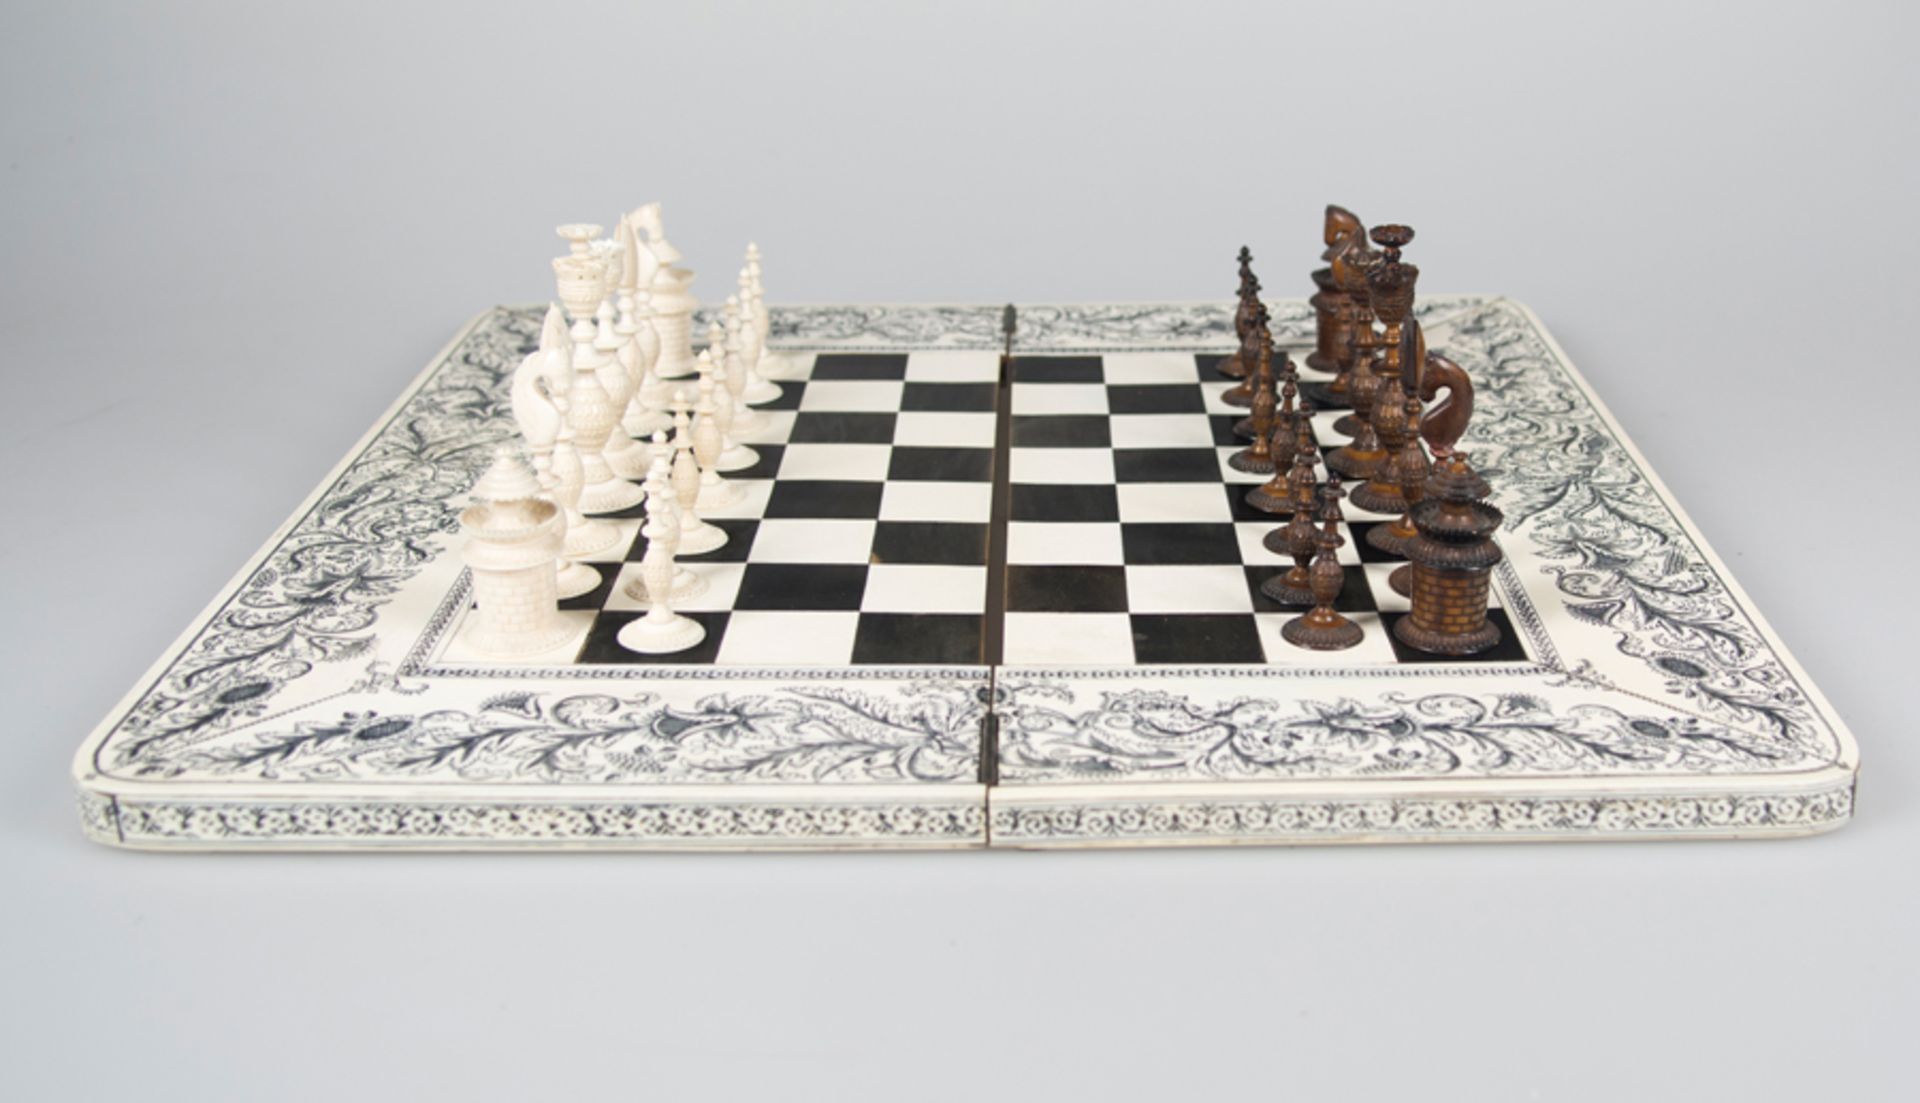 Complete chess set in wood, stained ivory and in its color. Anglo-Indian School. Circa 1850. - Bild 3 aus 8